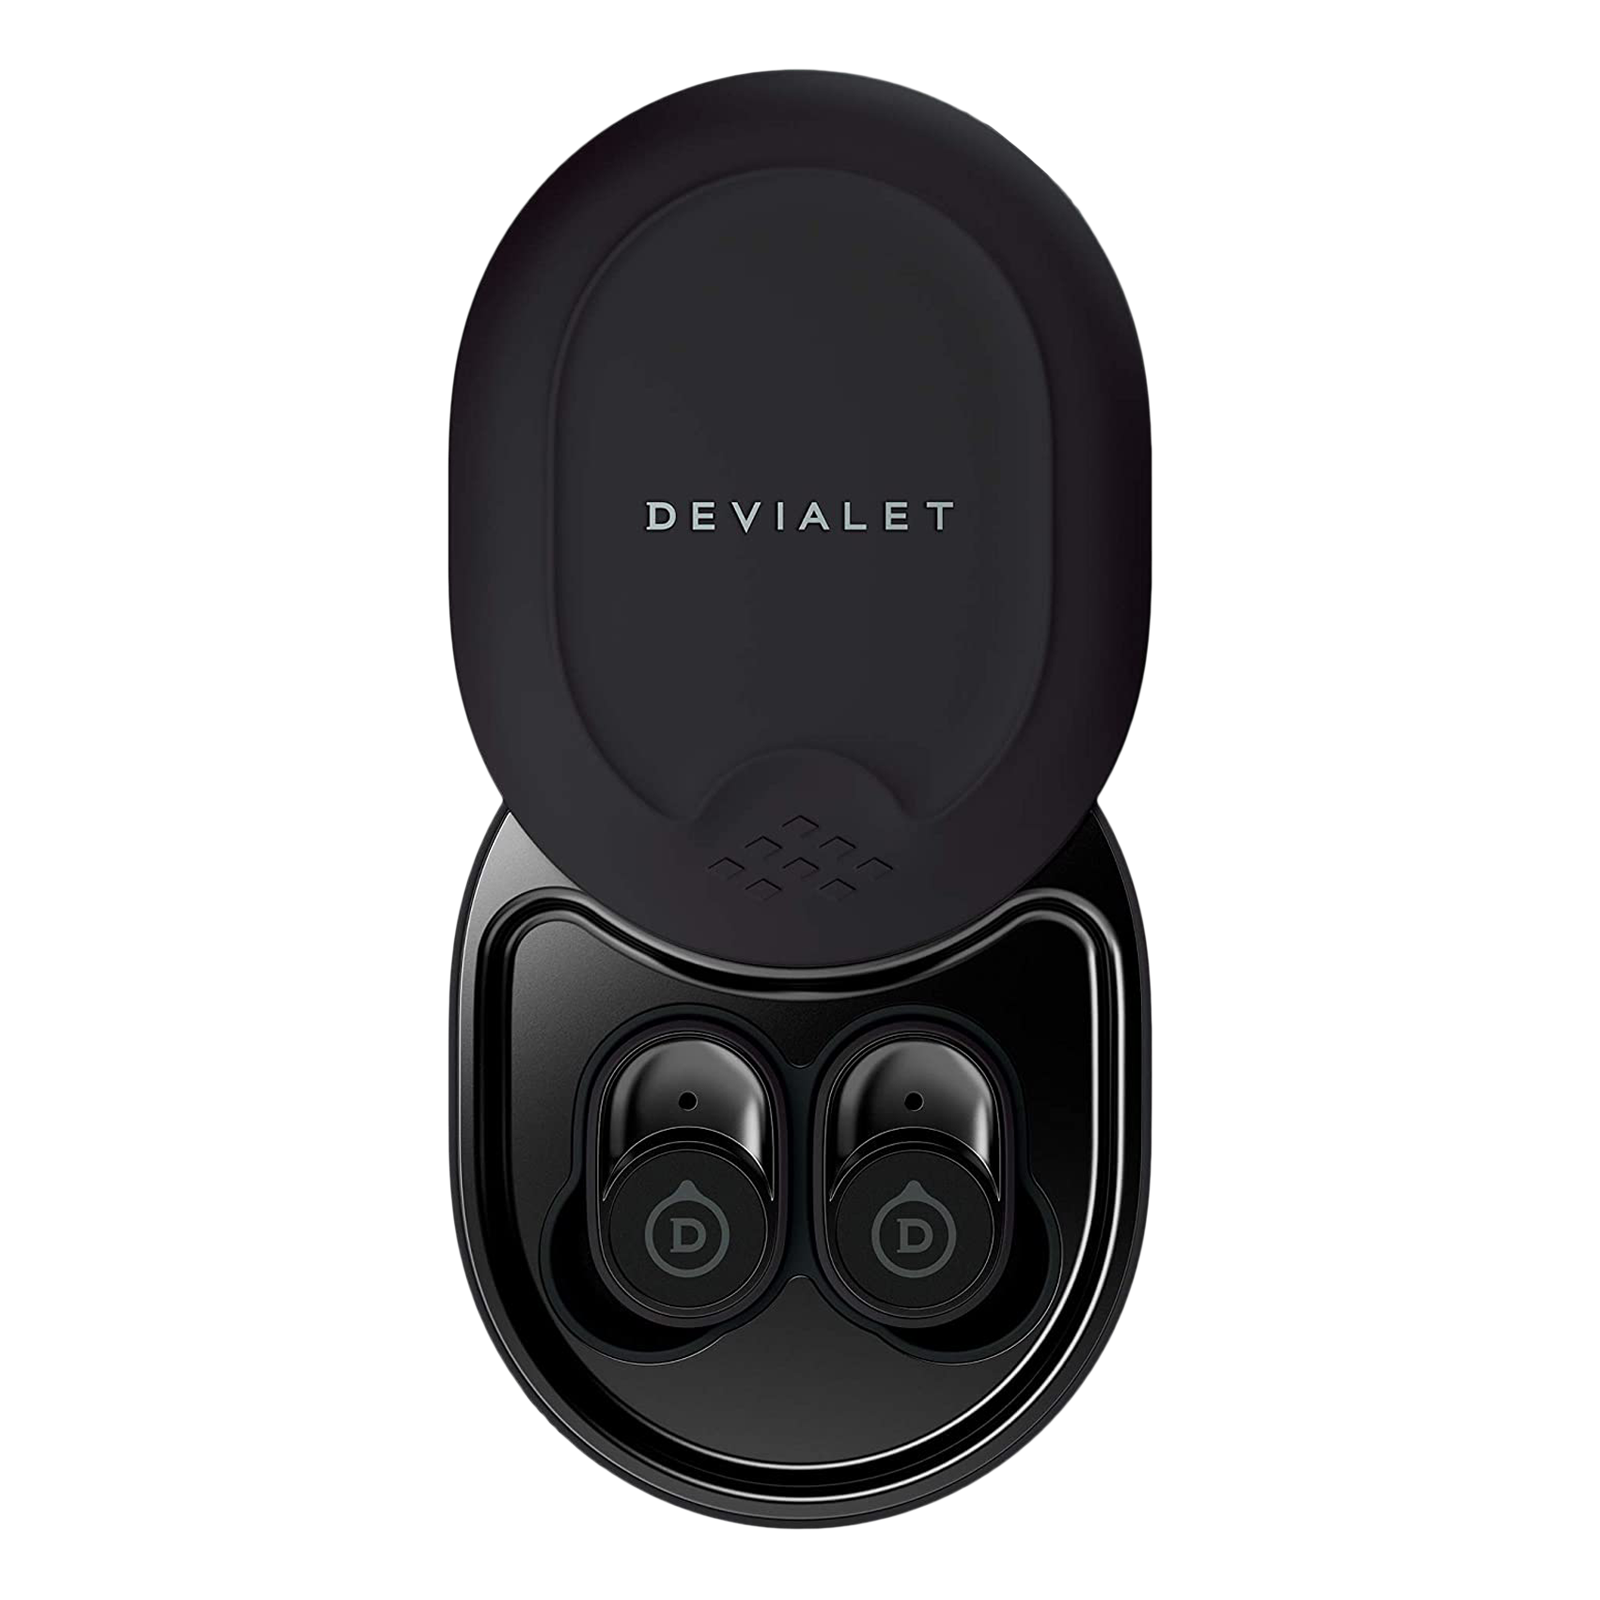 DEVIALET Gemini GMTWS TWS Earbuds with Active Noise Cancellation (IPX4 Water & Dust Resistant, 24 Hours Playback, Matte Black)